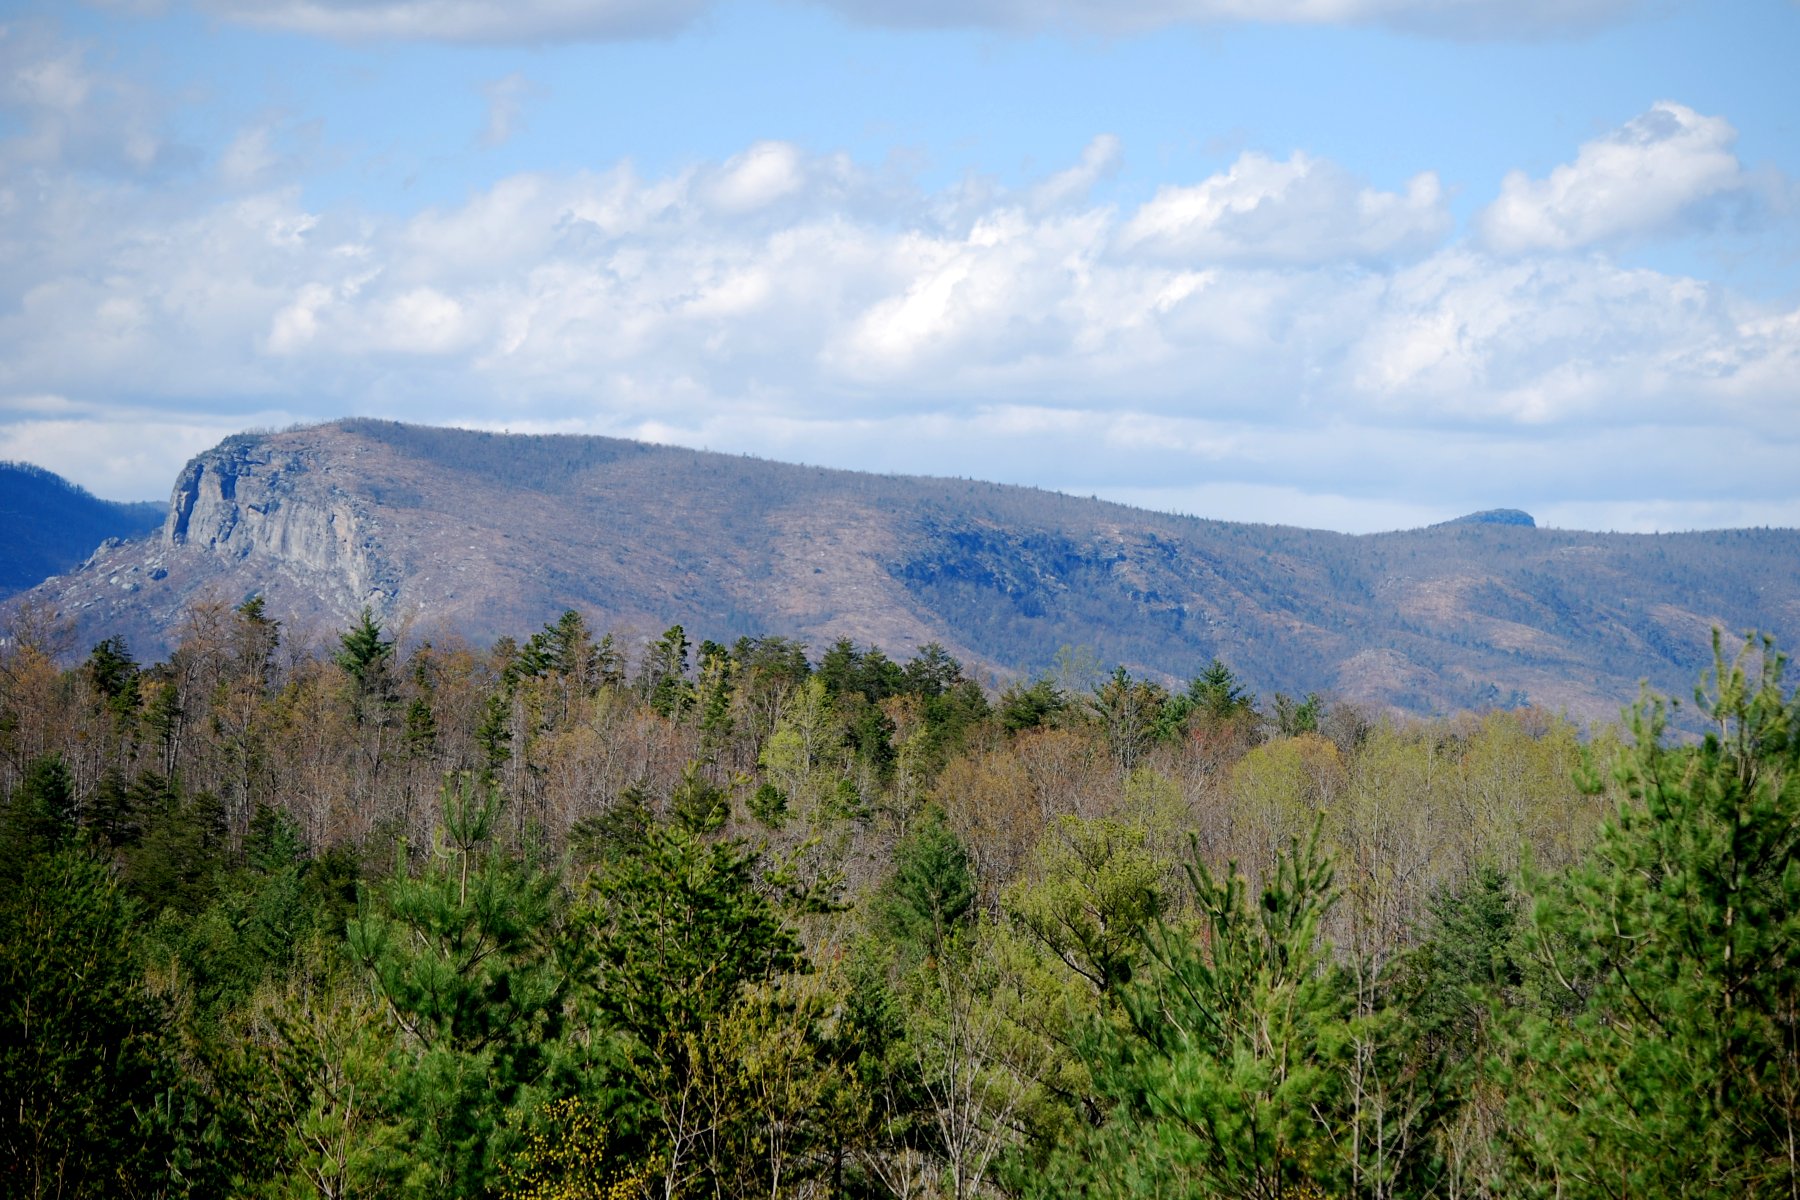 trees in the foreground and mountain tops in the background